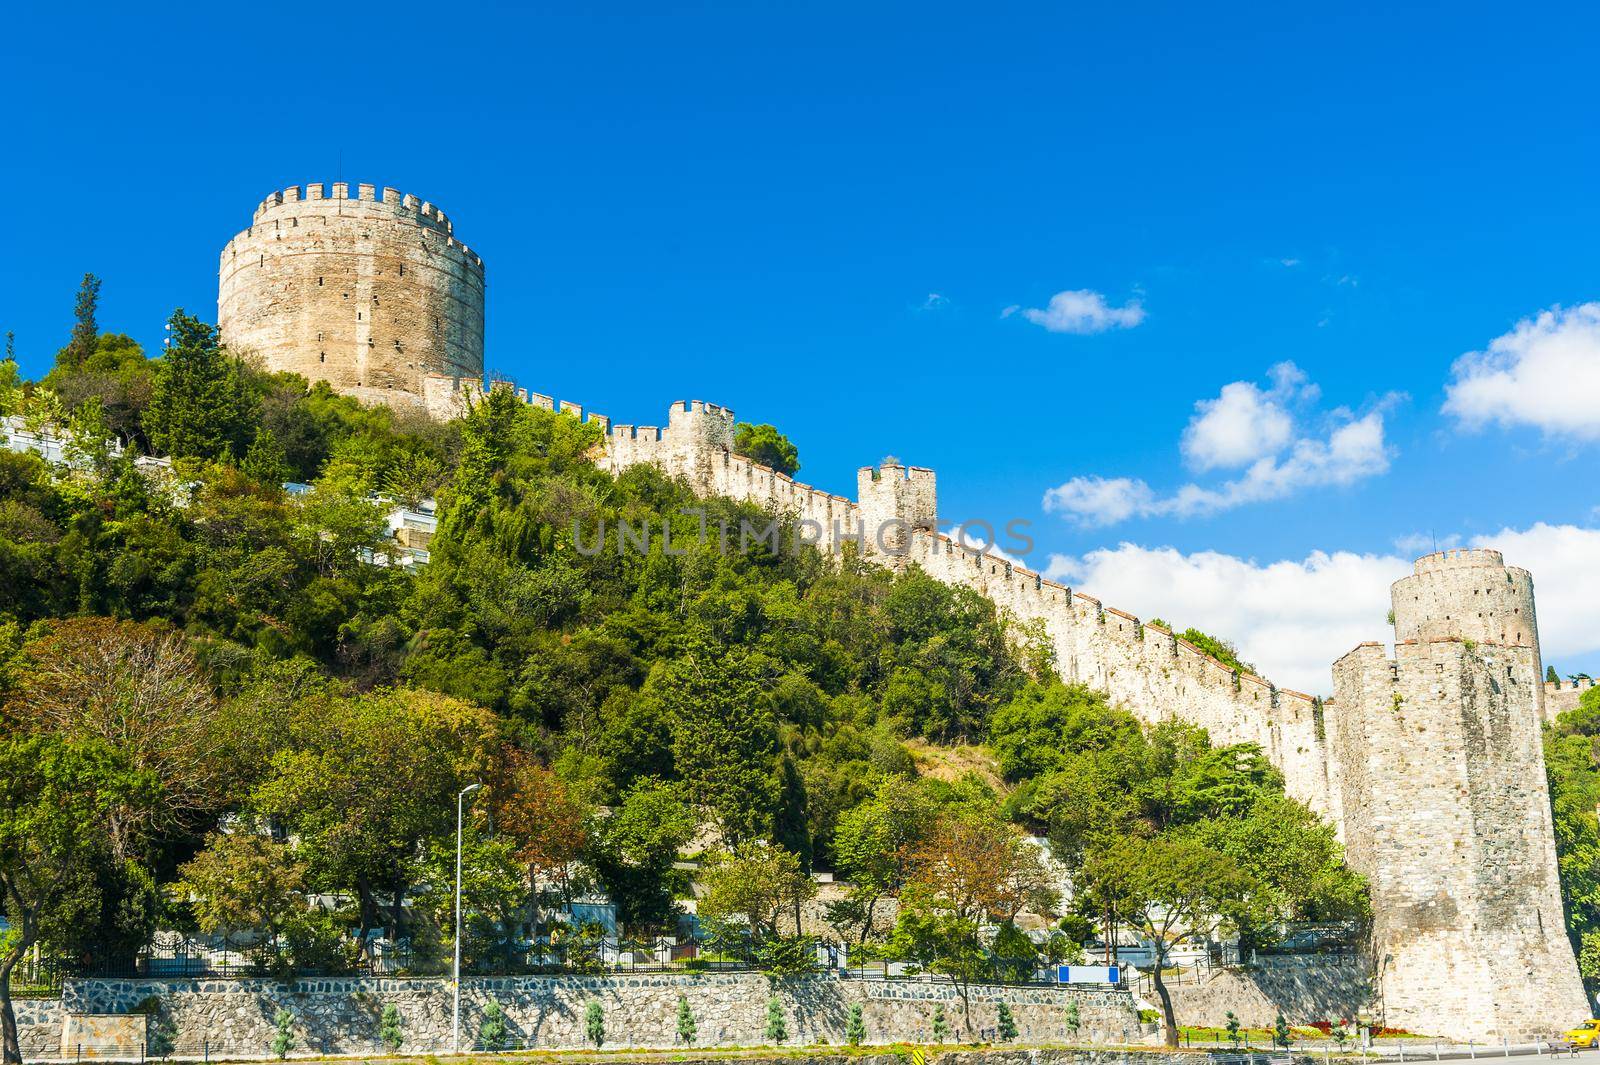 Ancient medieval castle Rumeli Hisari built on a hill above a Bosphorus in Istanbul in Turkey. The fortress was constructed by Ottoman Turks in 15th century before the siege of Byzantine capital Constantinople